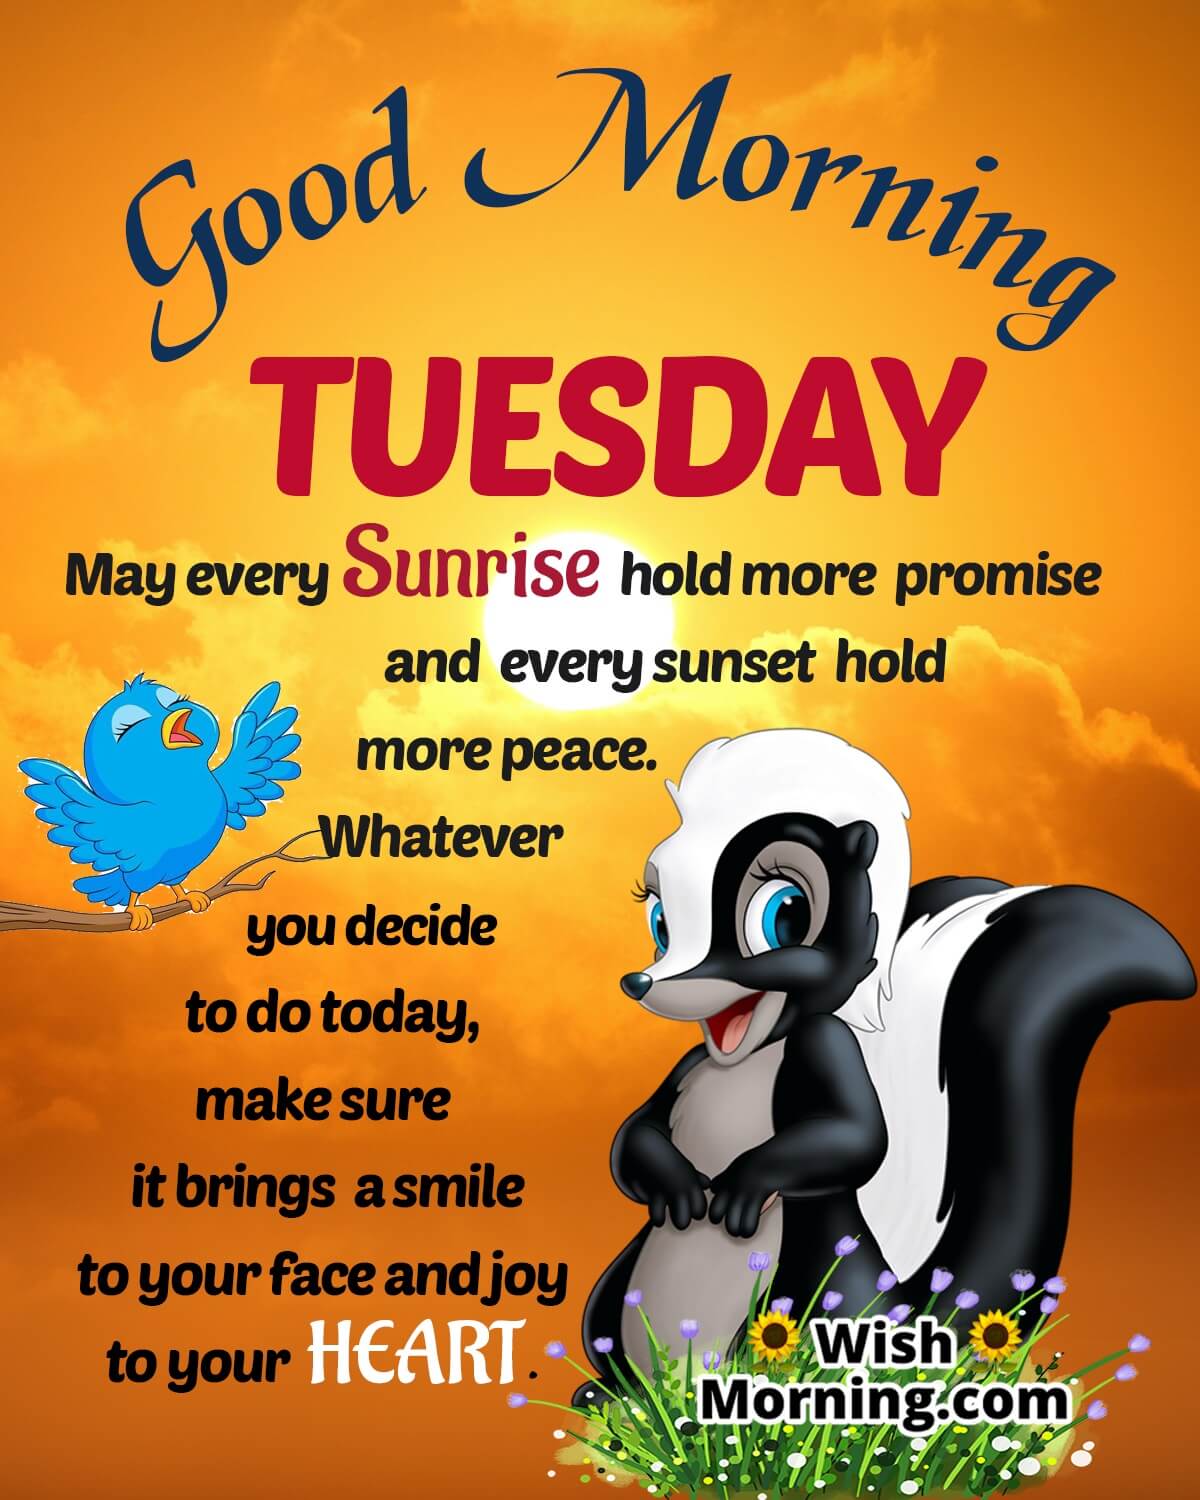 Good Morning Tuesday Sunrise Quote Wishes